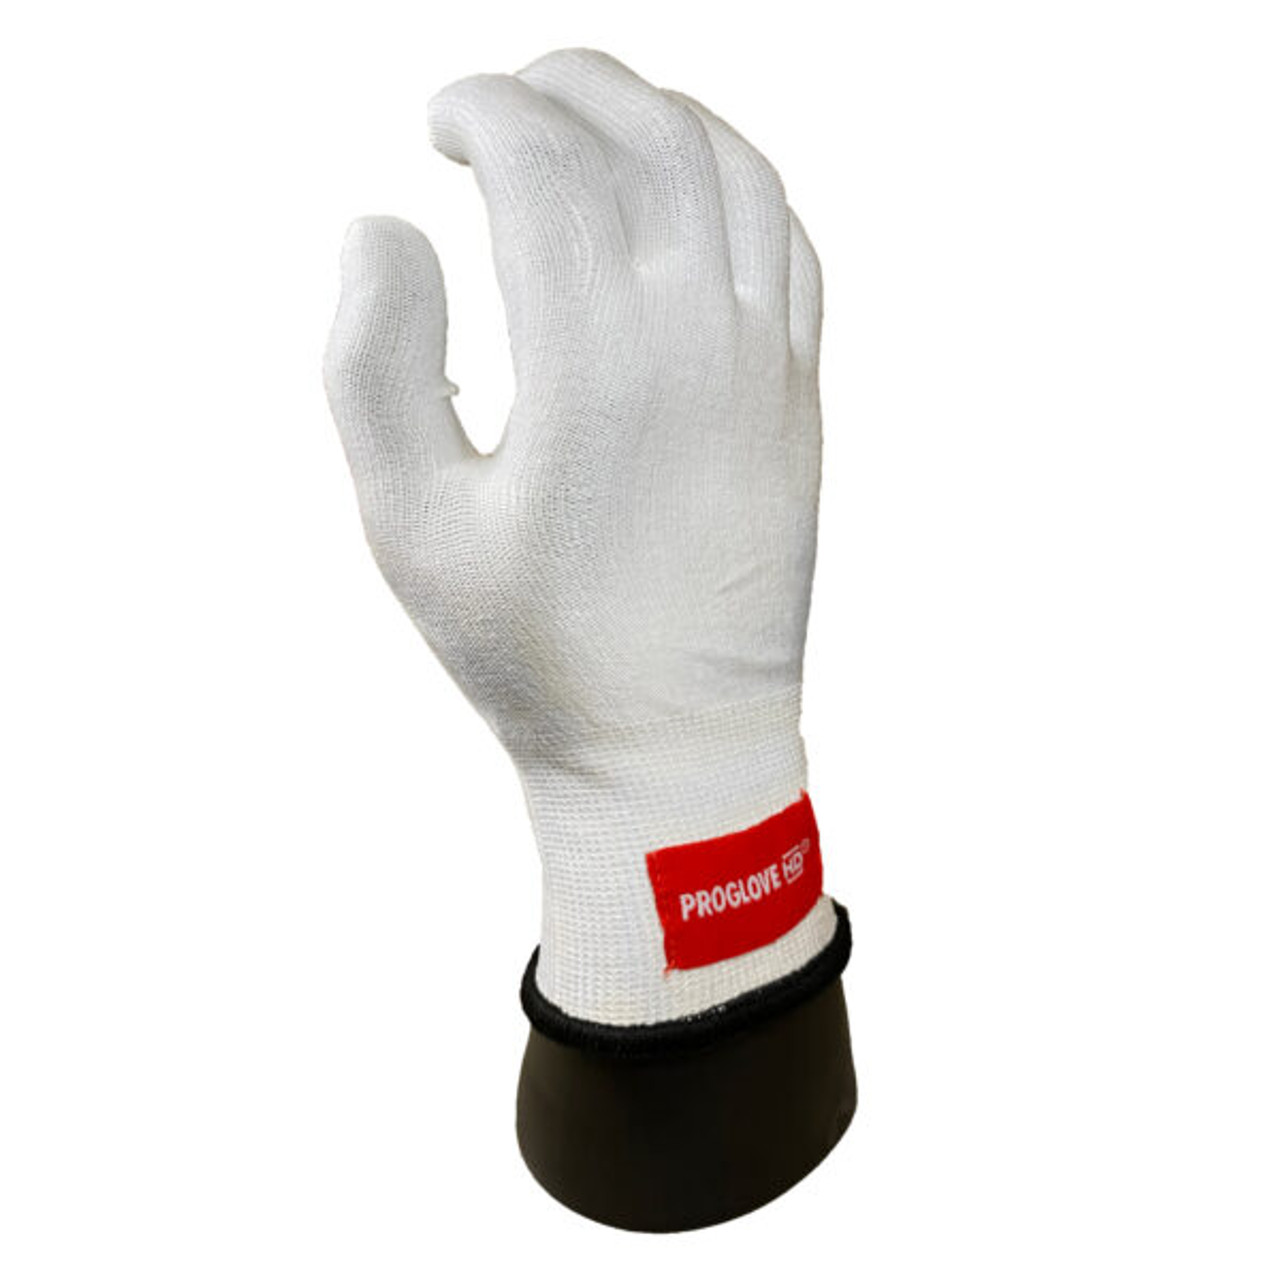 PID PROSERIES PROGLOVE HD – Your Ultimate Companion for Vehicle Wrap  Installation!